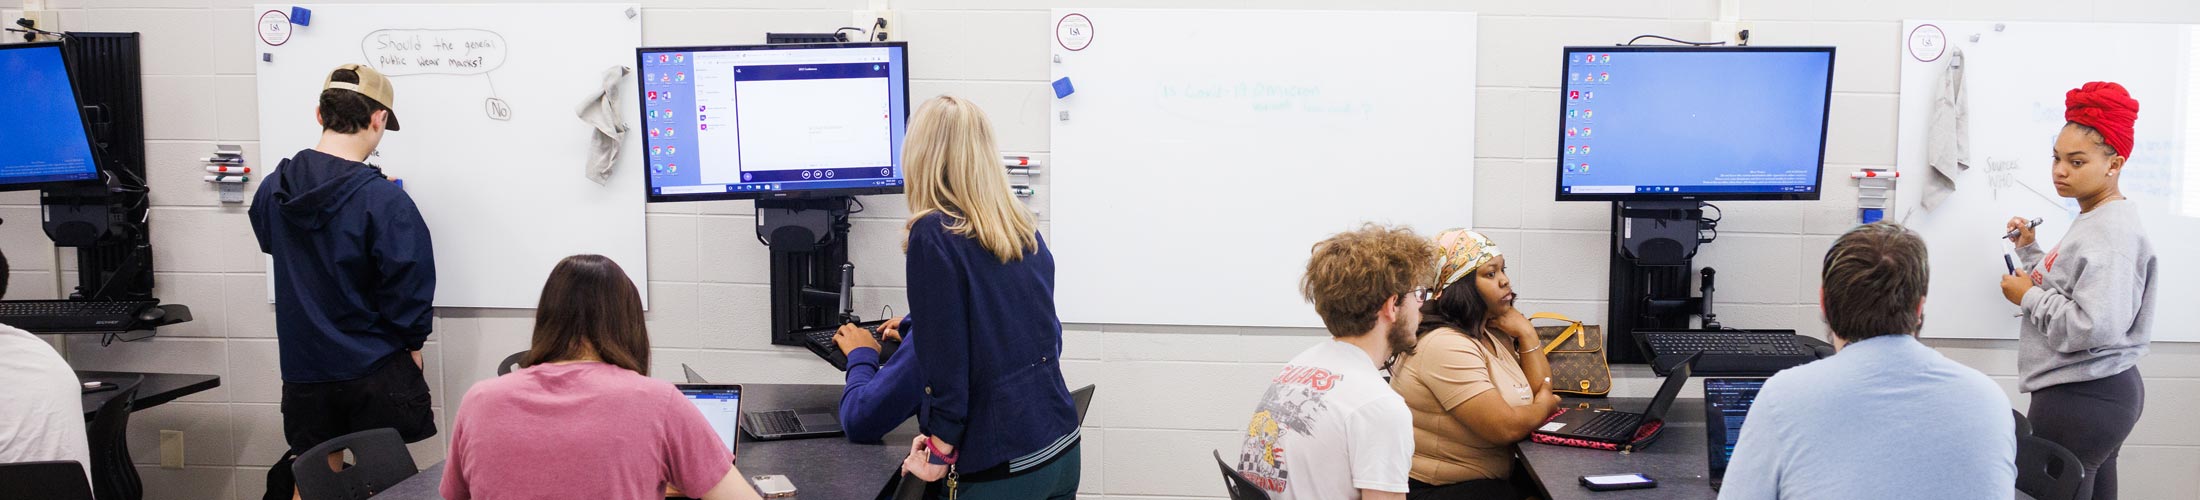 Students and professors working at whiteboard in classroom.